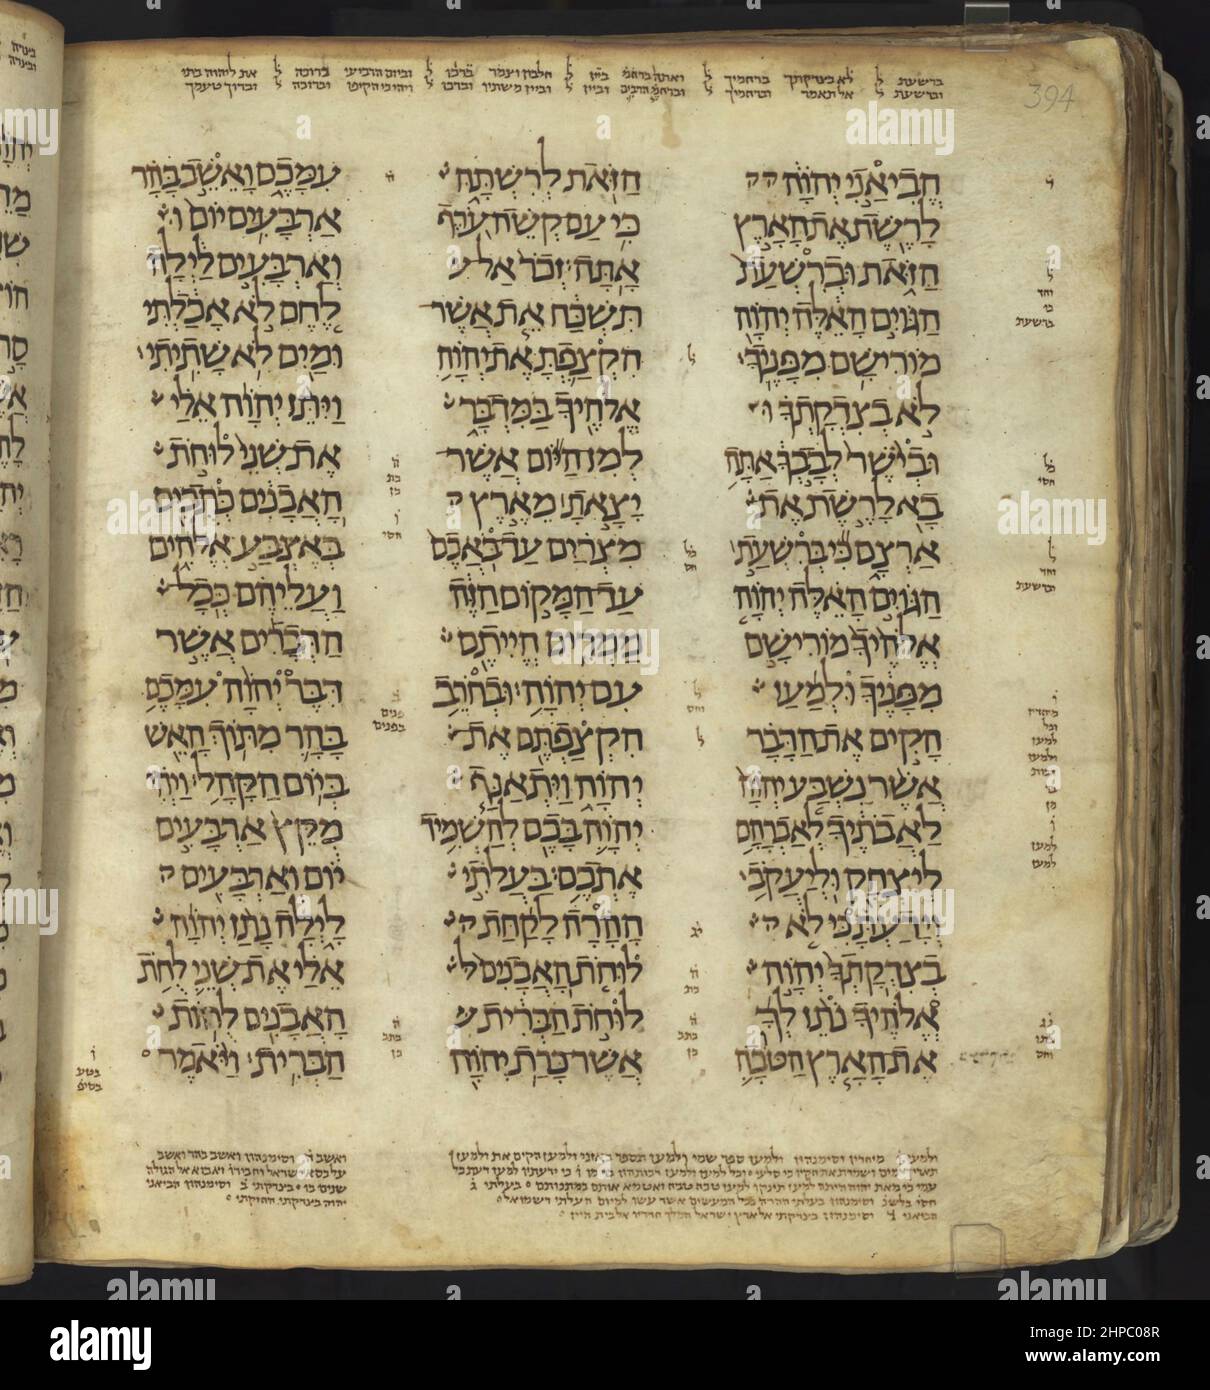 The Damascus Pentateuch (Keter Dameseq or Crown of Damascus) is a 10th-century Hebrew Bible codex, consisting of the almost complete Pentateuch, the Five Books of Moses. he codex was copied by an unknown scribe, replete with Masoretic annotations. The manuscript is defective in its beginning, as it starts with Genesis 9:26, and Exodus 18:1–23 is also missing. In 1975 it was acquired by the Jewish National and University Library, Jerusalem, which in 2008 changed its name to 'National Library of Israel'. The codex was published in a large, two-volume facsimile edition in 1978. It should not be c Stock Photo